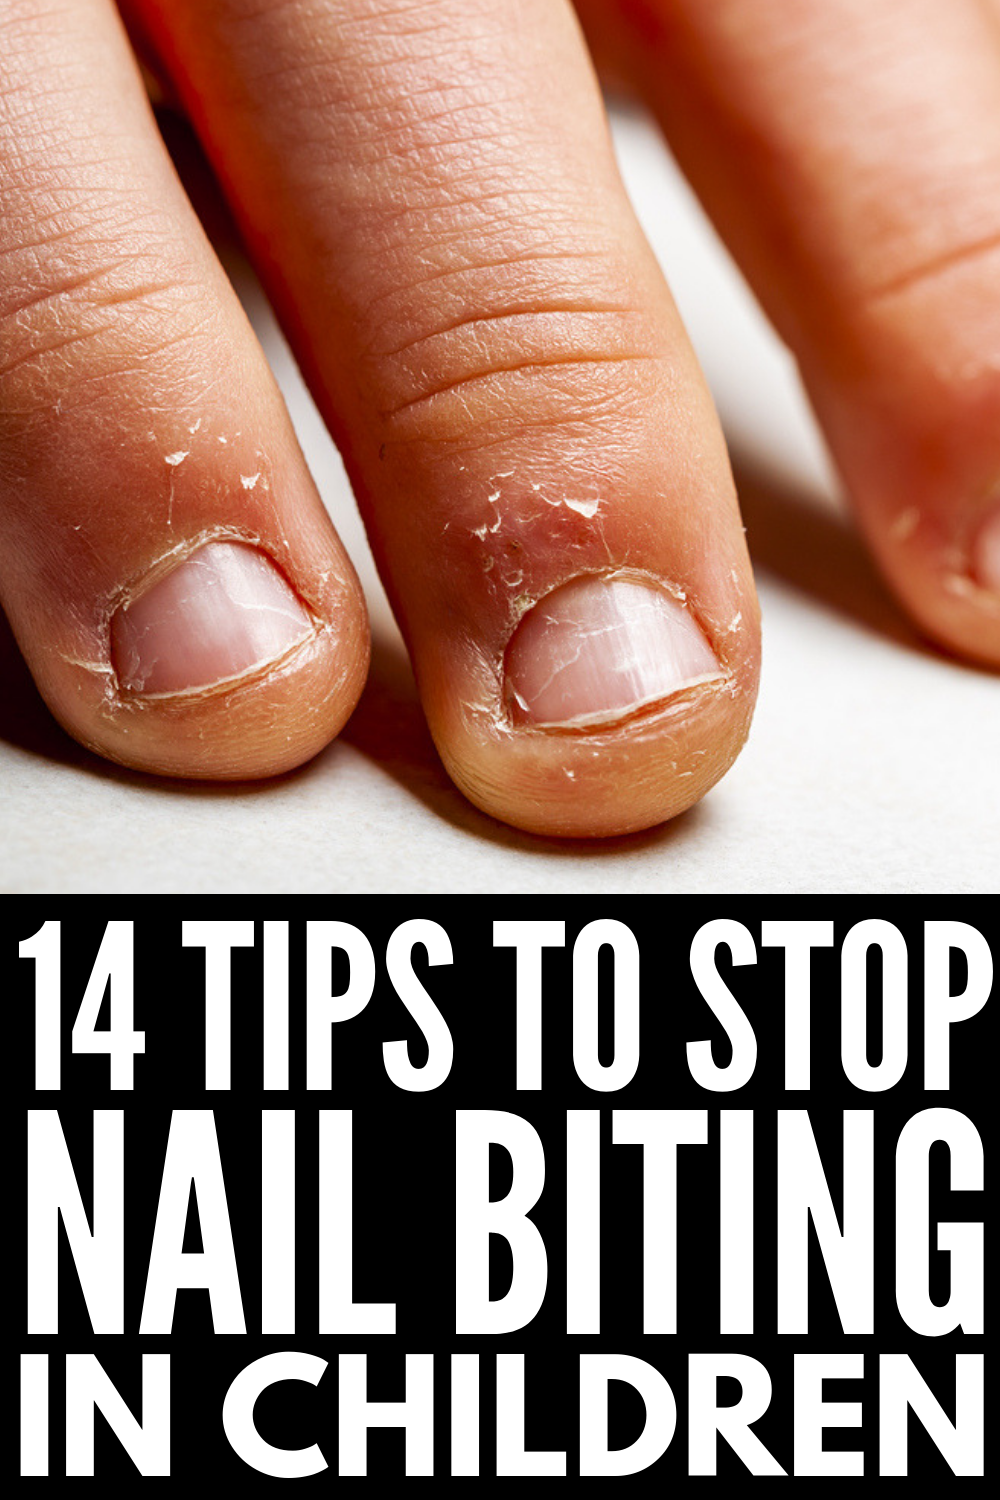 7 tips to stop biting your nails – 